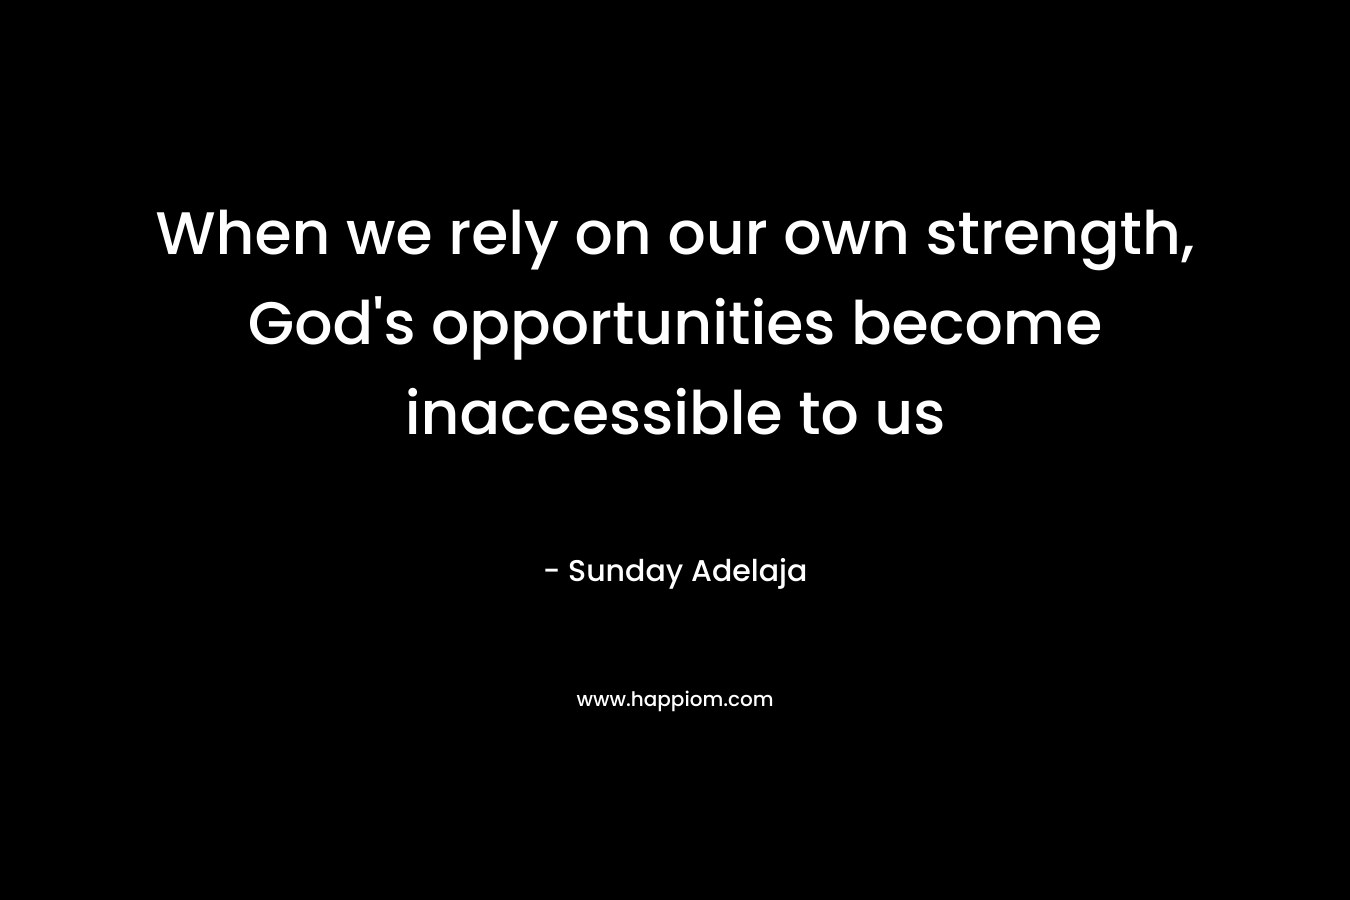 When we rely on our own strength, God’s opportunities become inaccessible to us – Sunday Adelaja